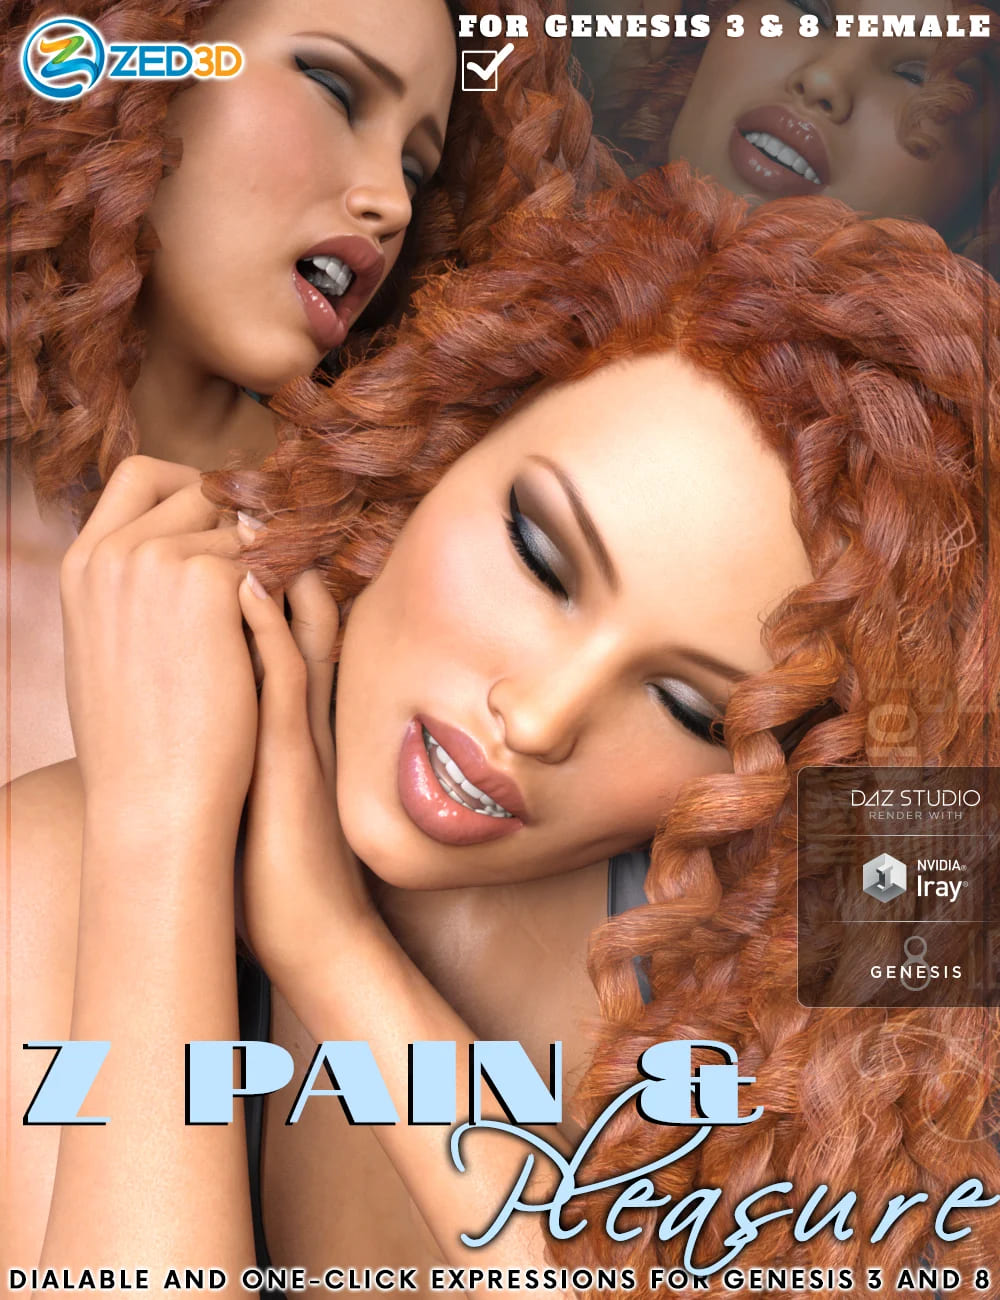 Z Pain and Pleasure Expressions for Genesis 3 and 8 Female_DAZ3D下载站